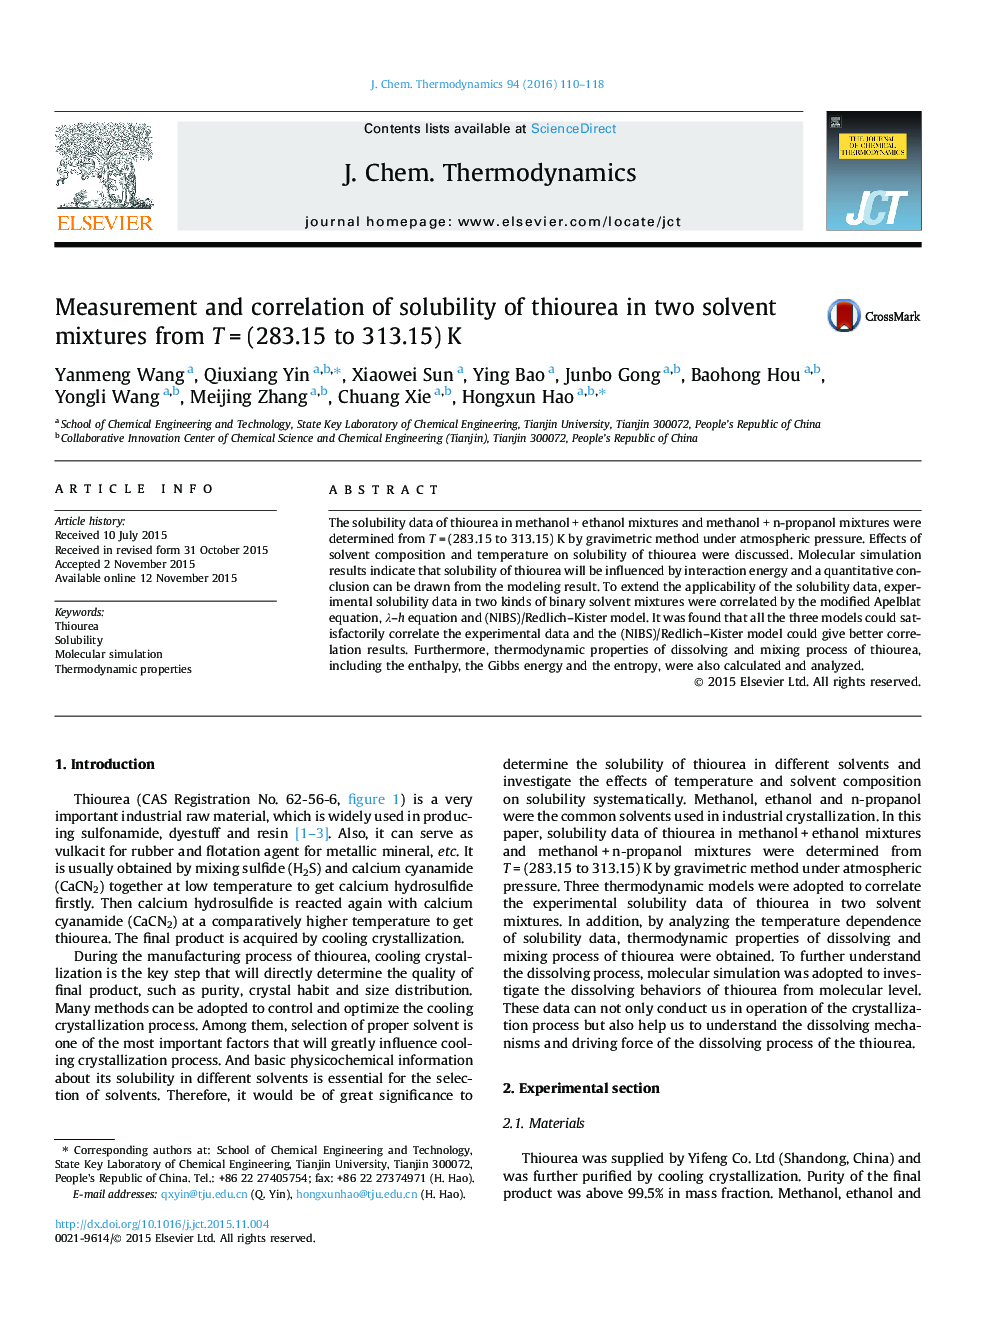 Measurement and correlation of solubility of thiourea in two solvent mixtures from T = (283.15 to 313.15) K